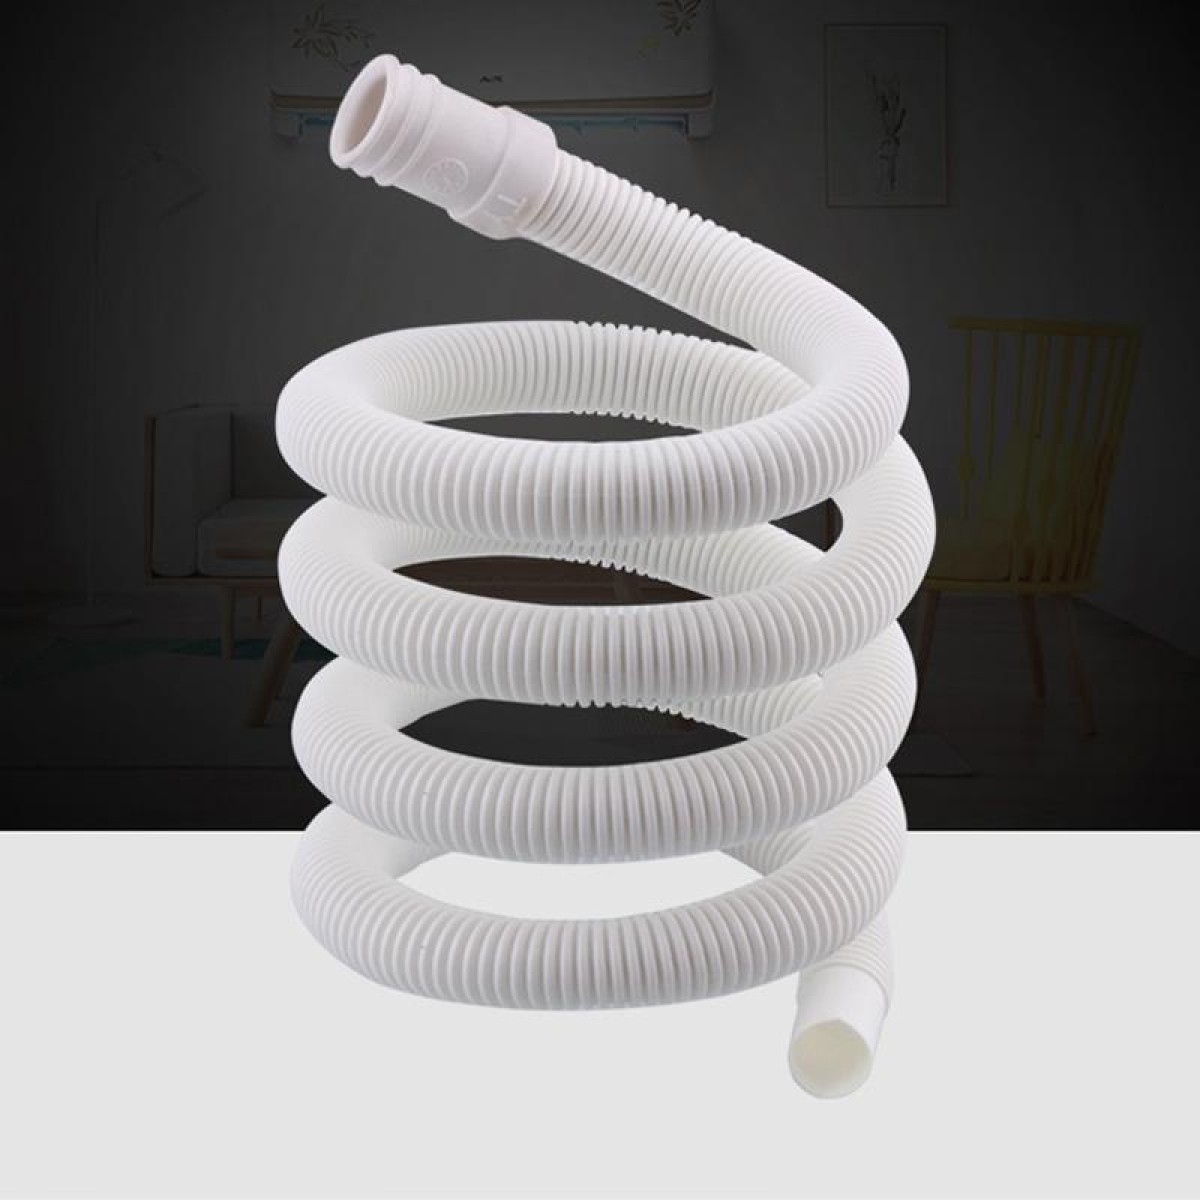 18mm Diameter Plastic Drain Pipe Water Outlet Extension Hose with Clamp for Semi-automatic Washing Machine / Air Conditioner, Size:5m  Length